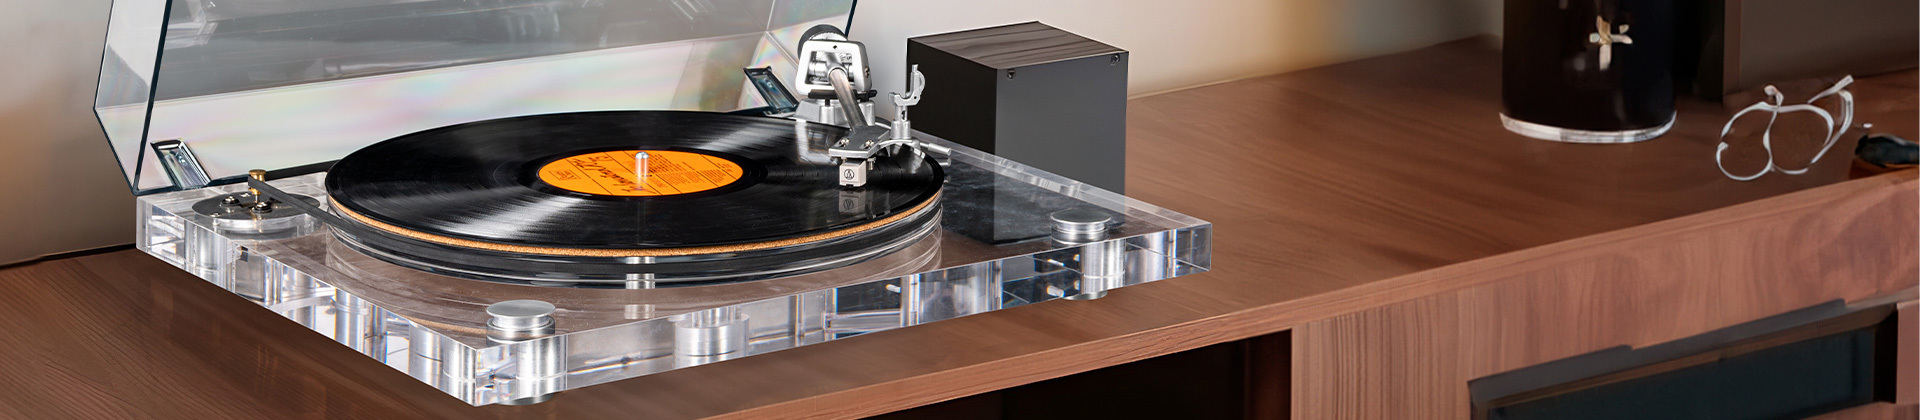 shop-new-arrivals-turntables-record-players-at-retrolifeplayer-com